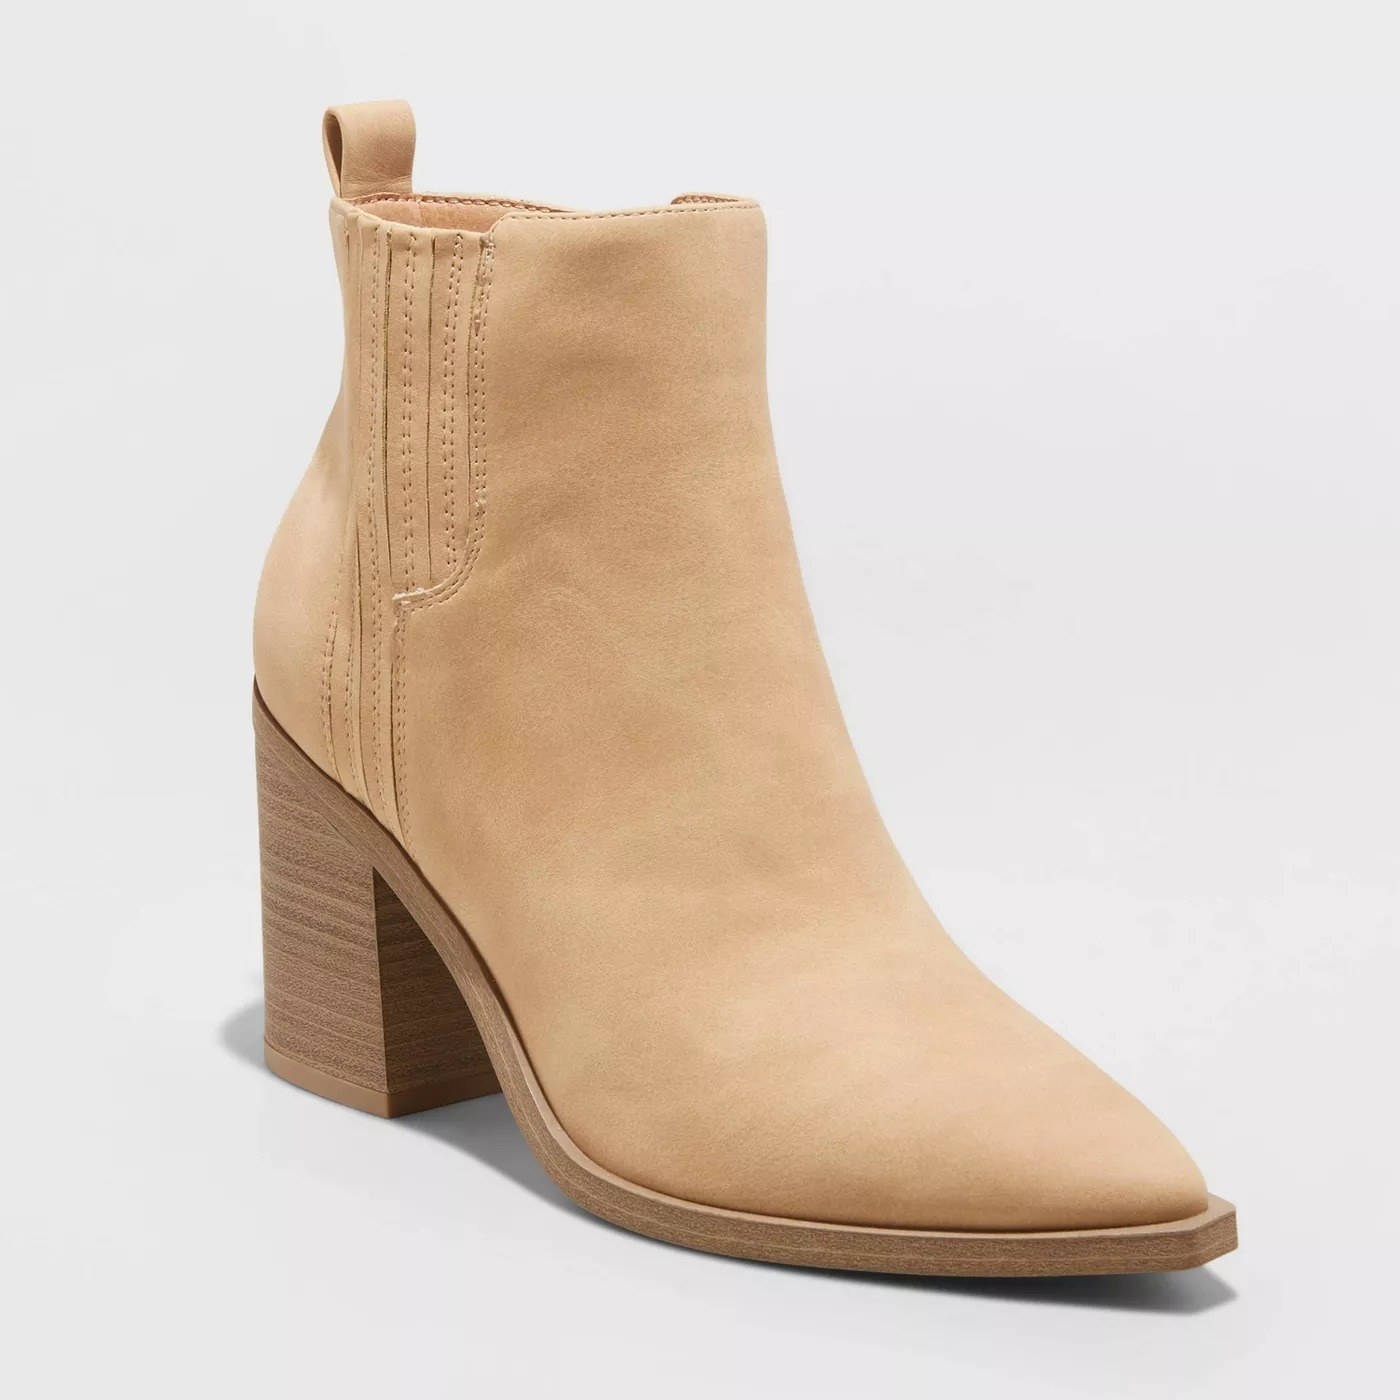 The beige bootie with pointed toe